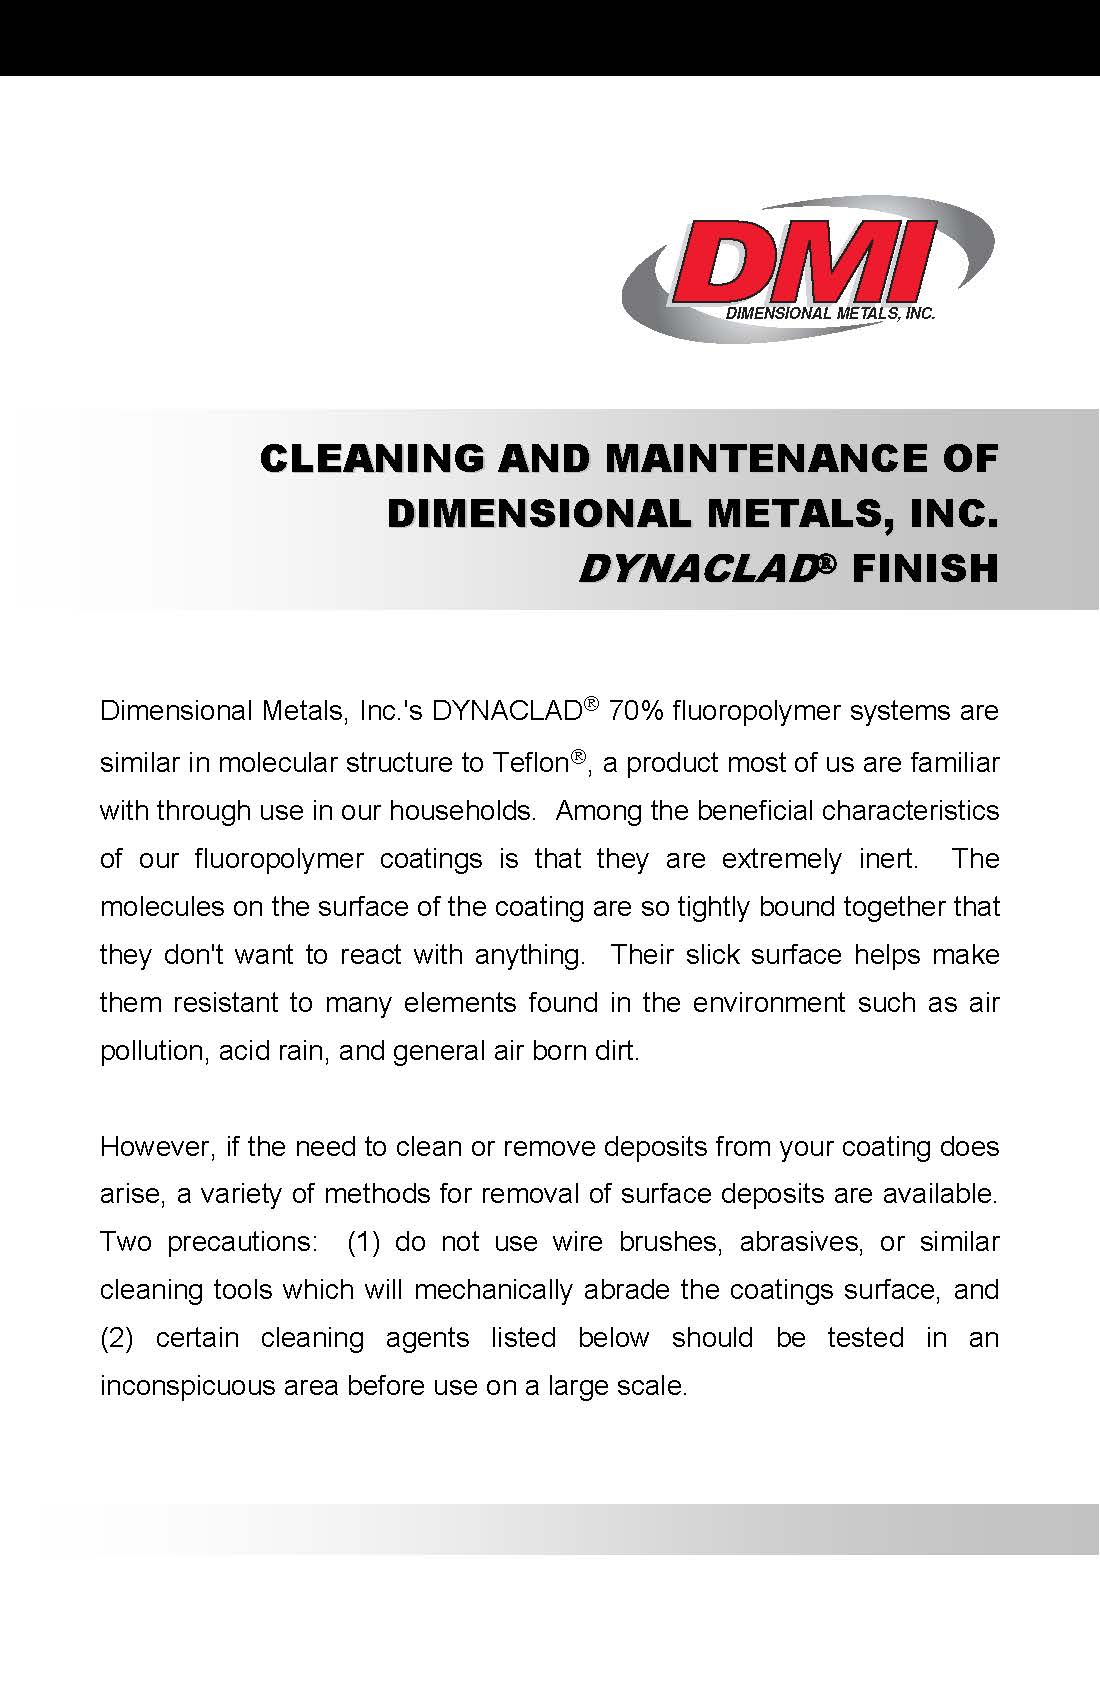 dmi-cleaning-maint-info